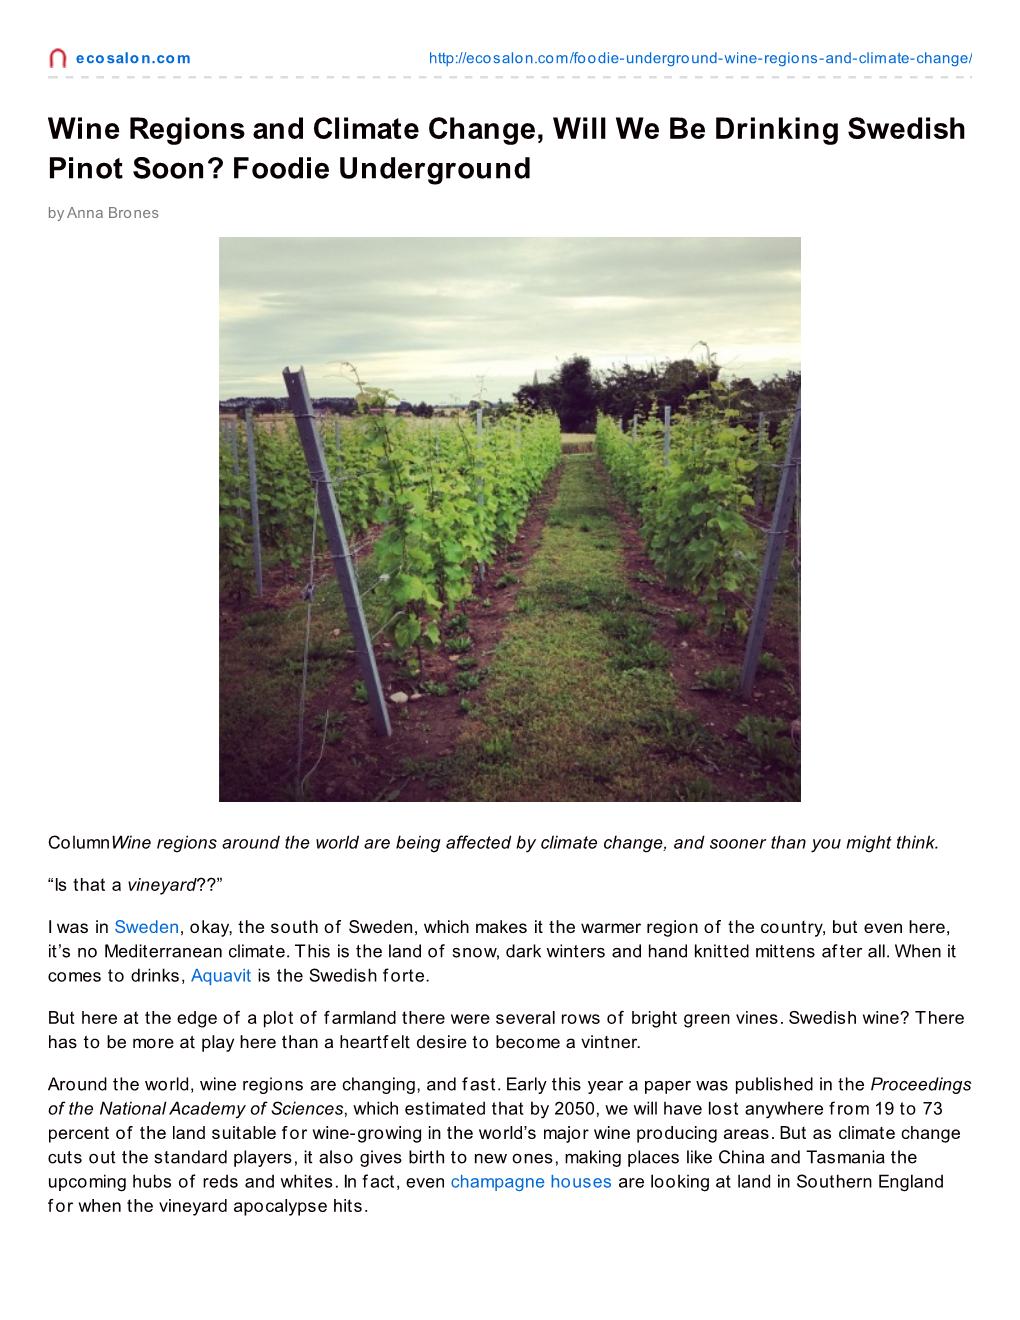 Wine Regions and Climate Change, Will We Be Drinking Swedish Pinot Soon? Foodie Underground by Anna Brones